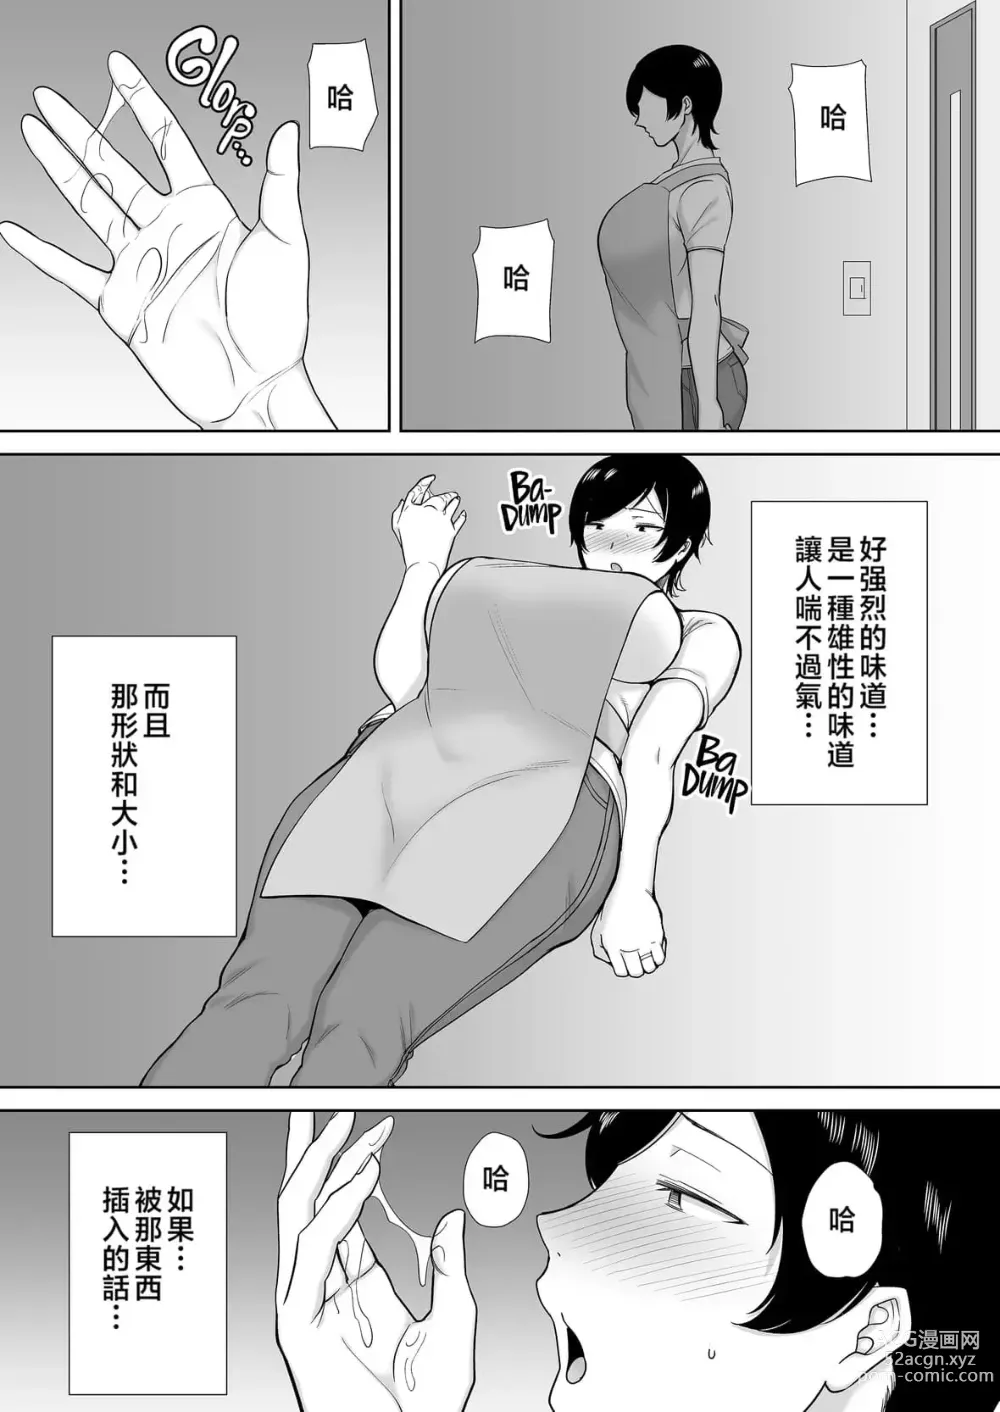 Page 7 of doujinshi even mom want a litle lovin